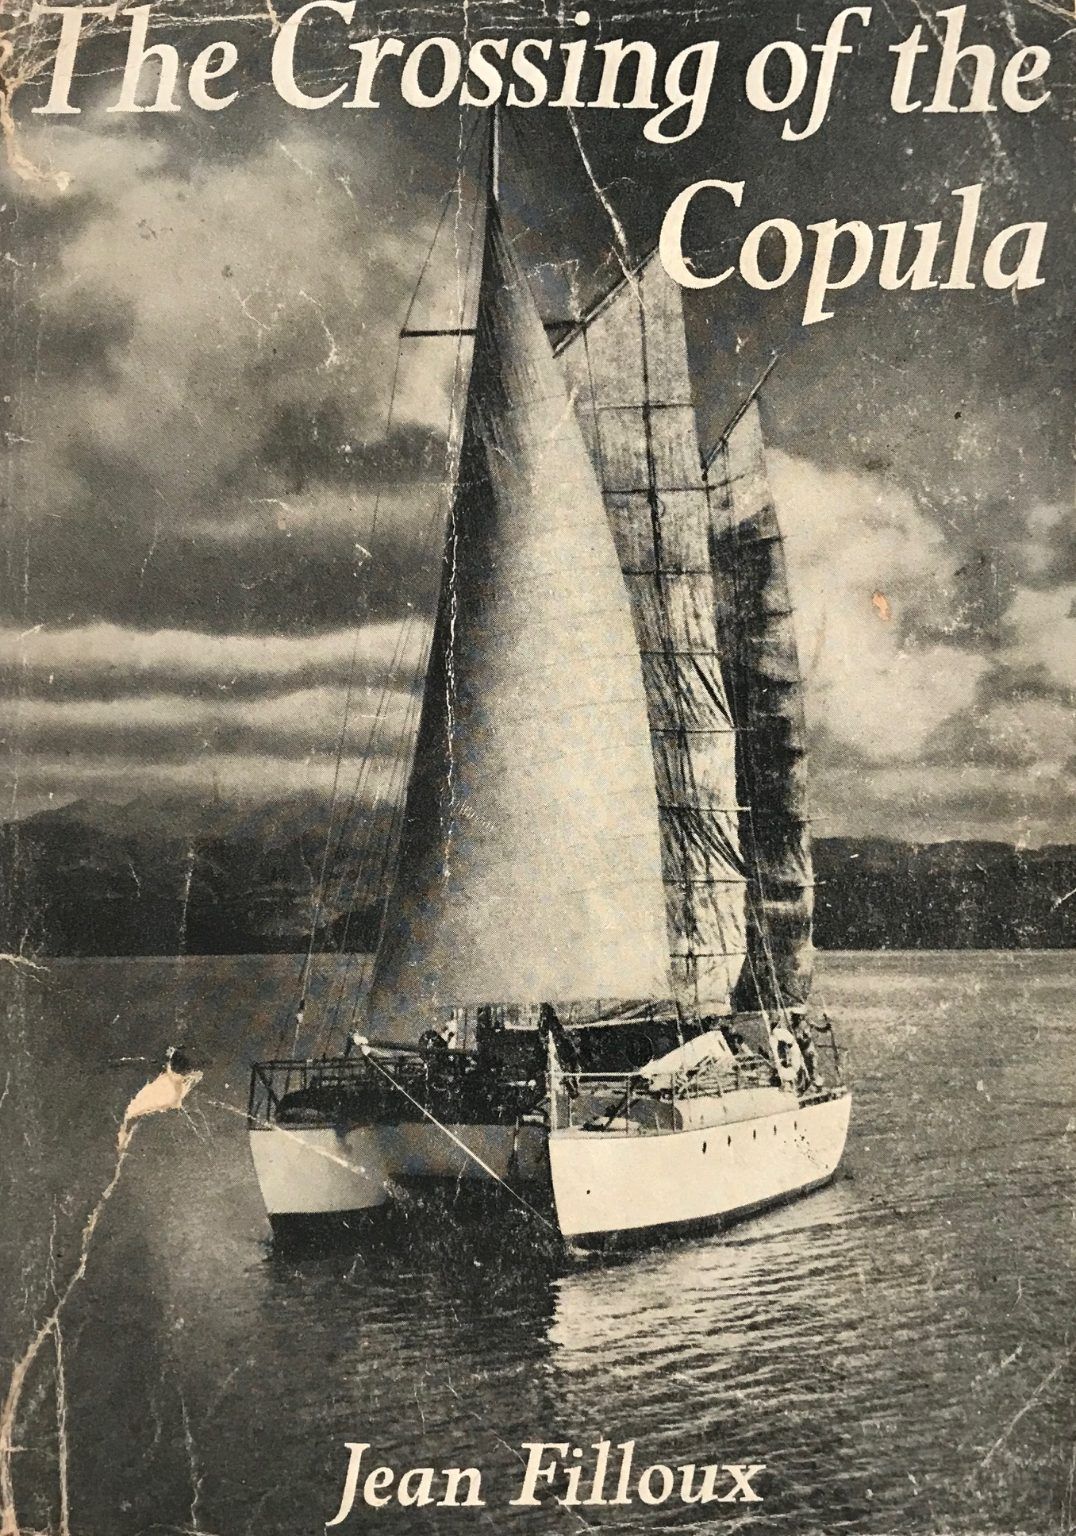 THE CROSSING OF THE COPULA